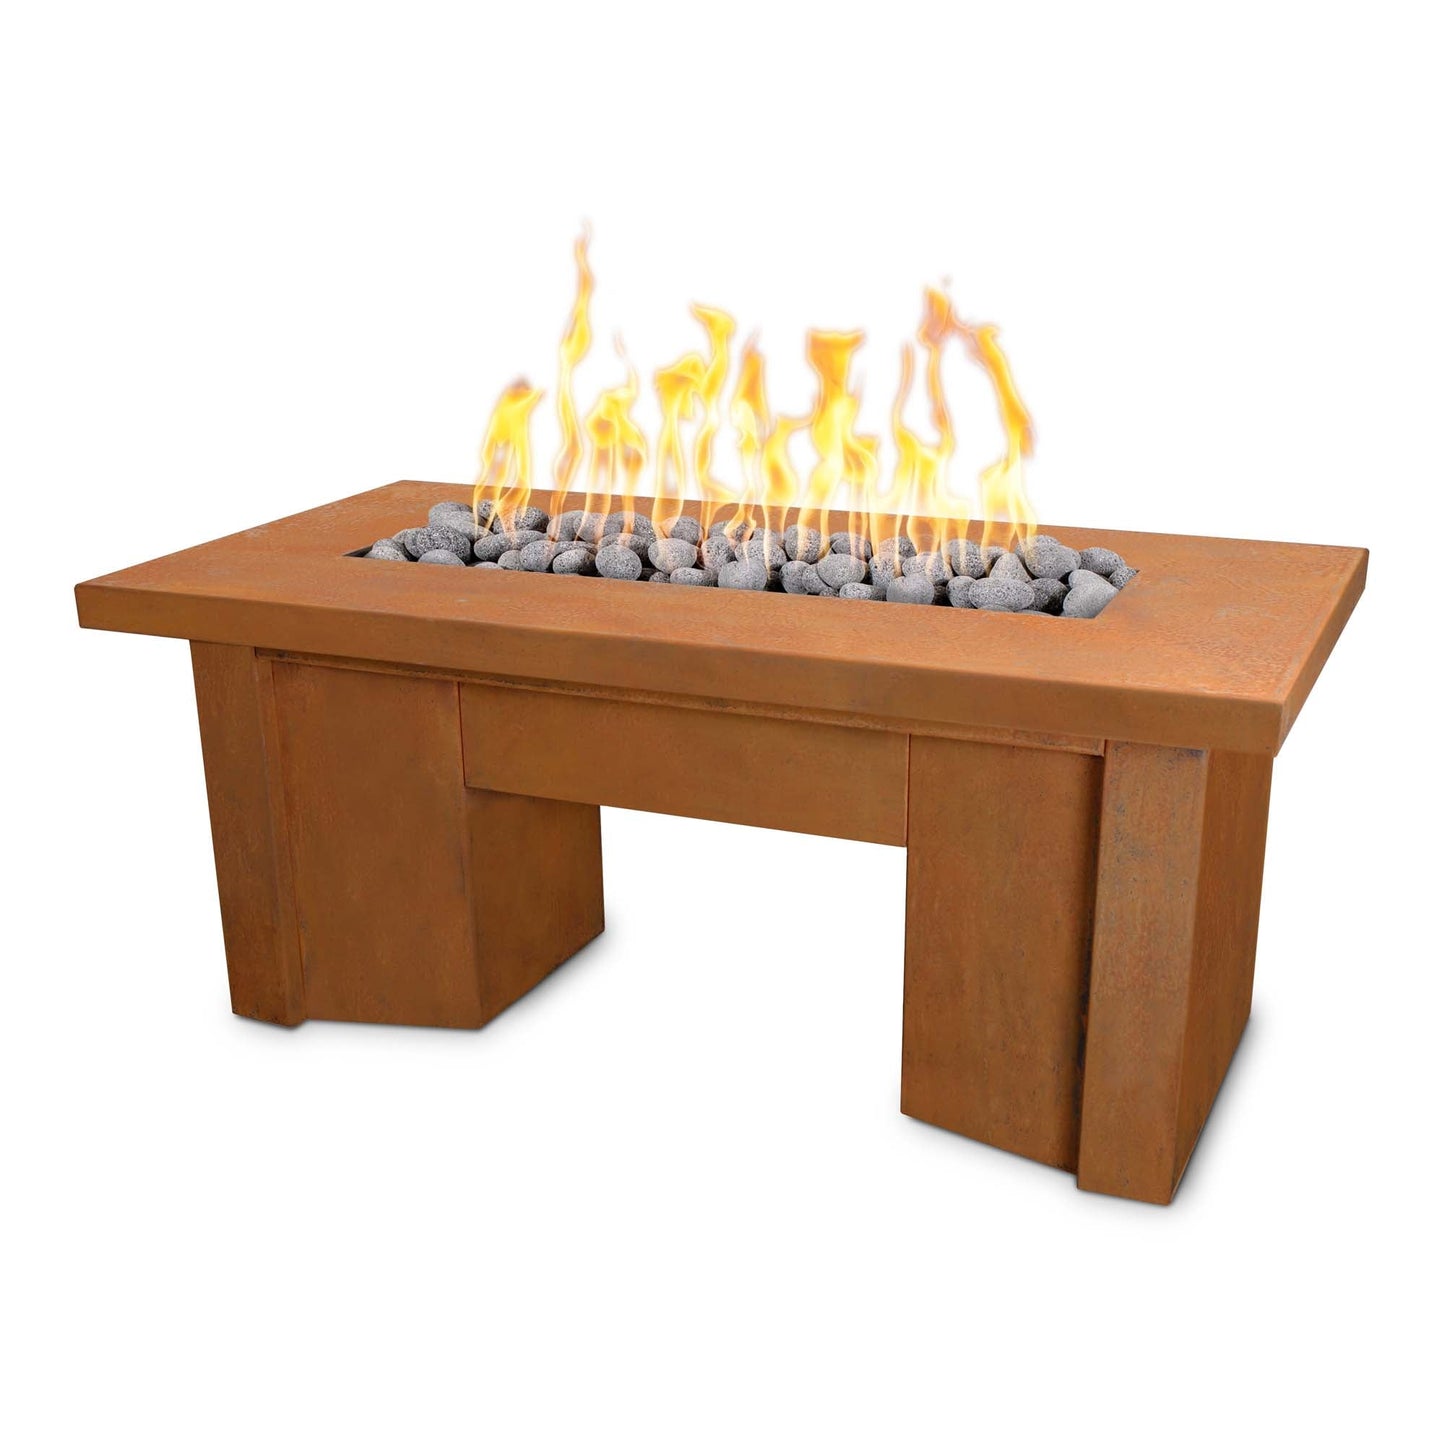 The Outdoor Plus Rectangular Alameda 78" Corten Steel Natural Gas Fire Pit with Flame Sense with Spark Ignition